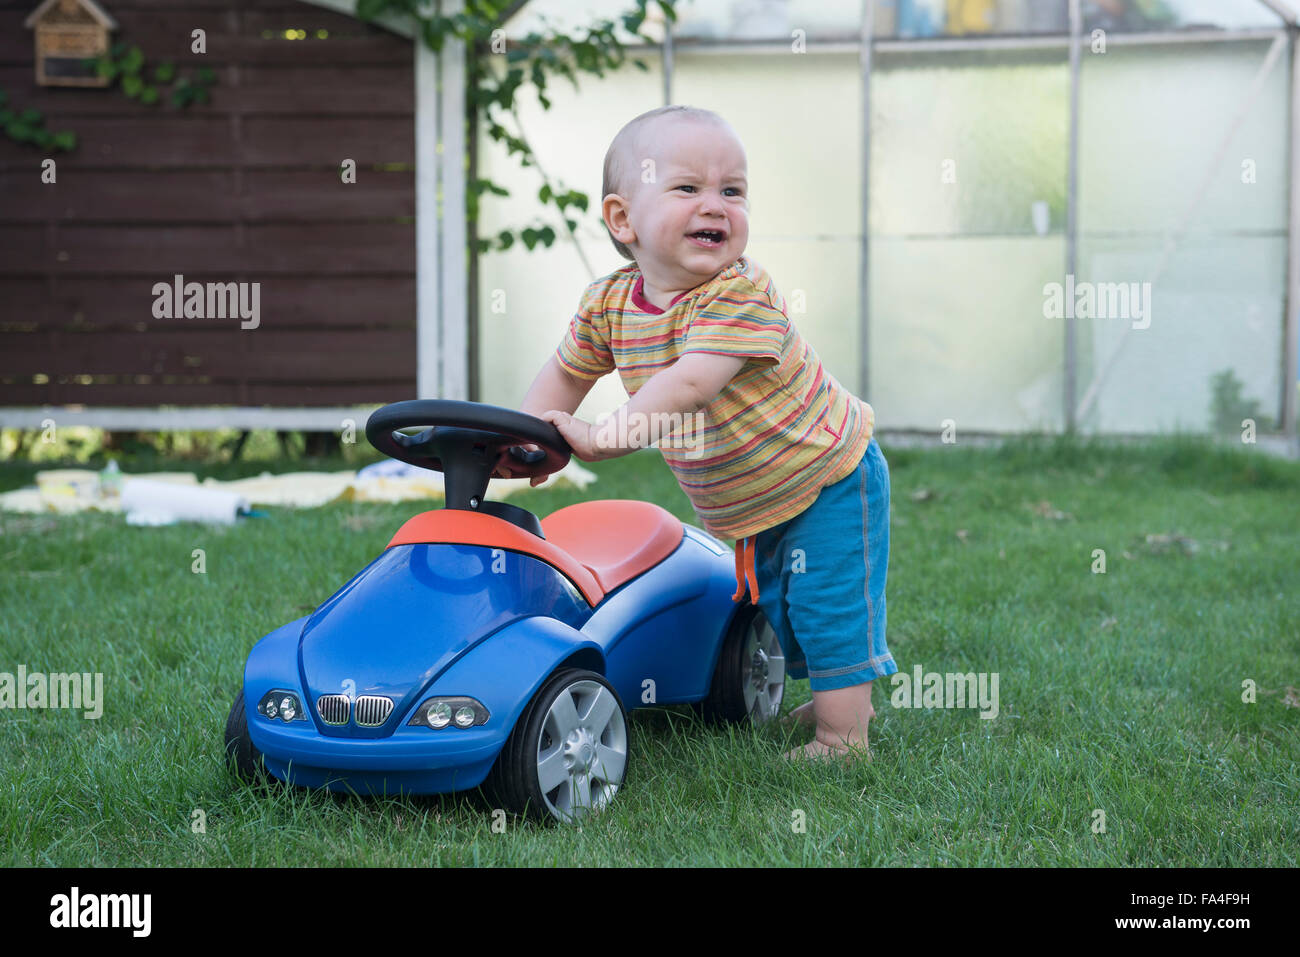 Baby boy with his toy car and crying in lawn, Munich, Bavaria, Germany Stock Photo